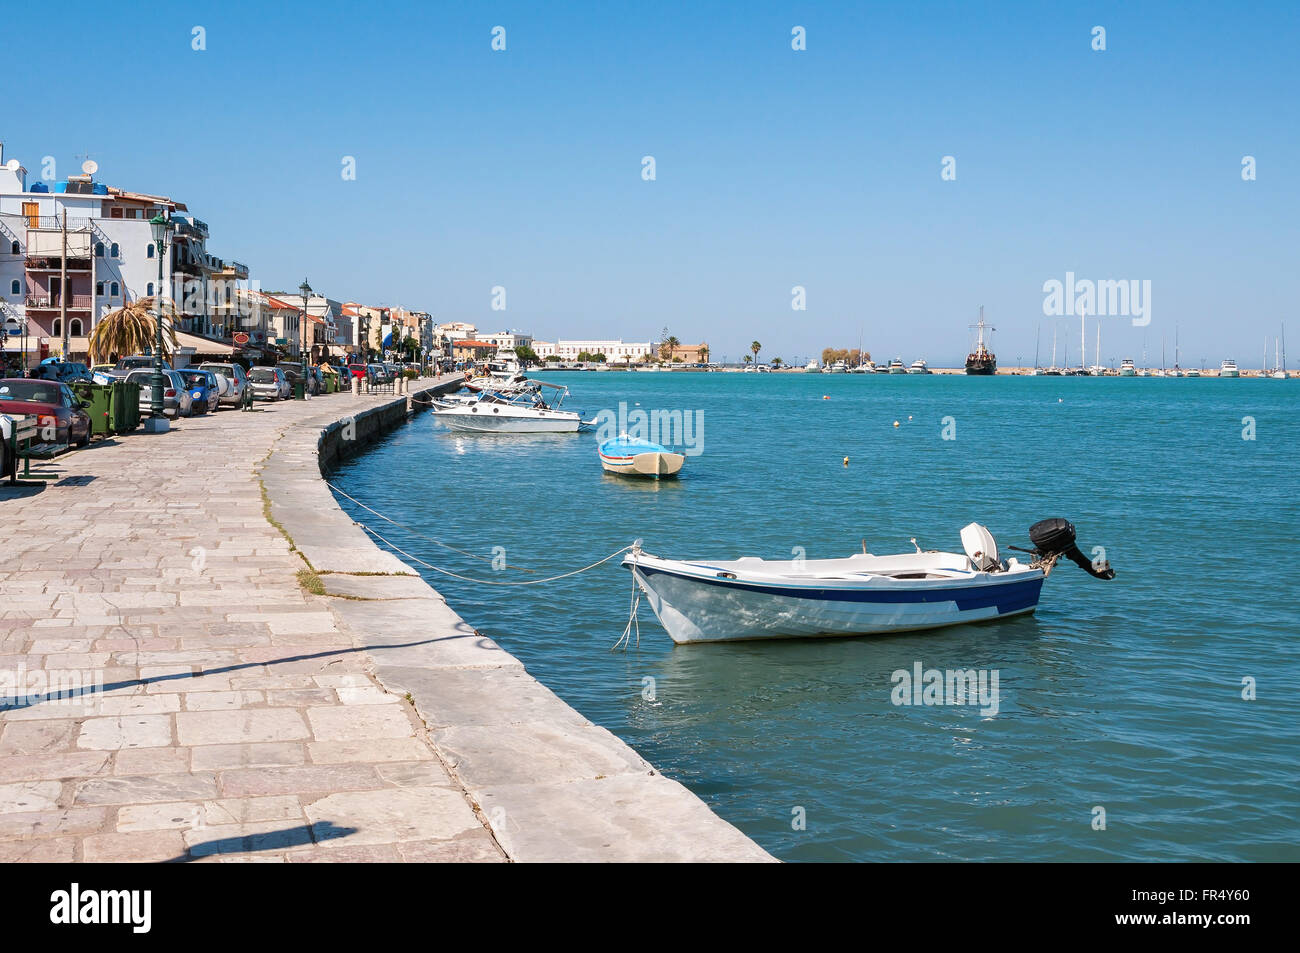 View of town and port of Zakynthos city, Greece Stock Photo